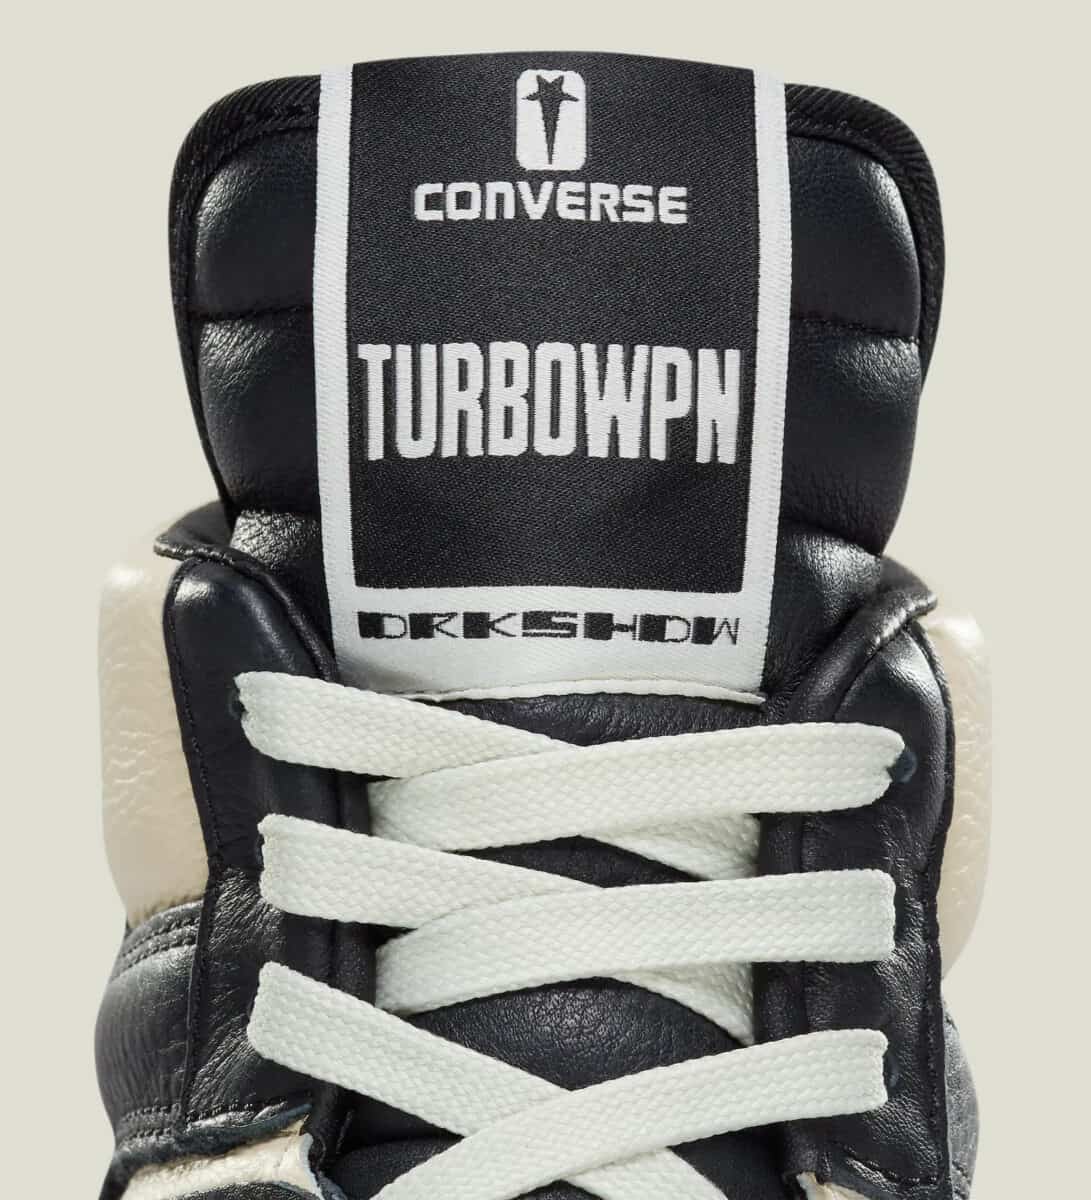 Rick Owens x Converse TURBOWPN Is Reviving The Silhouette